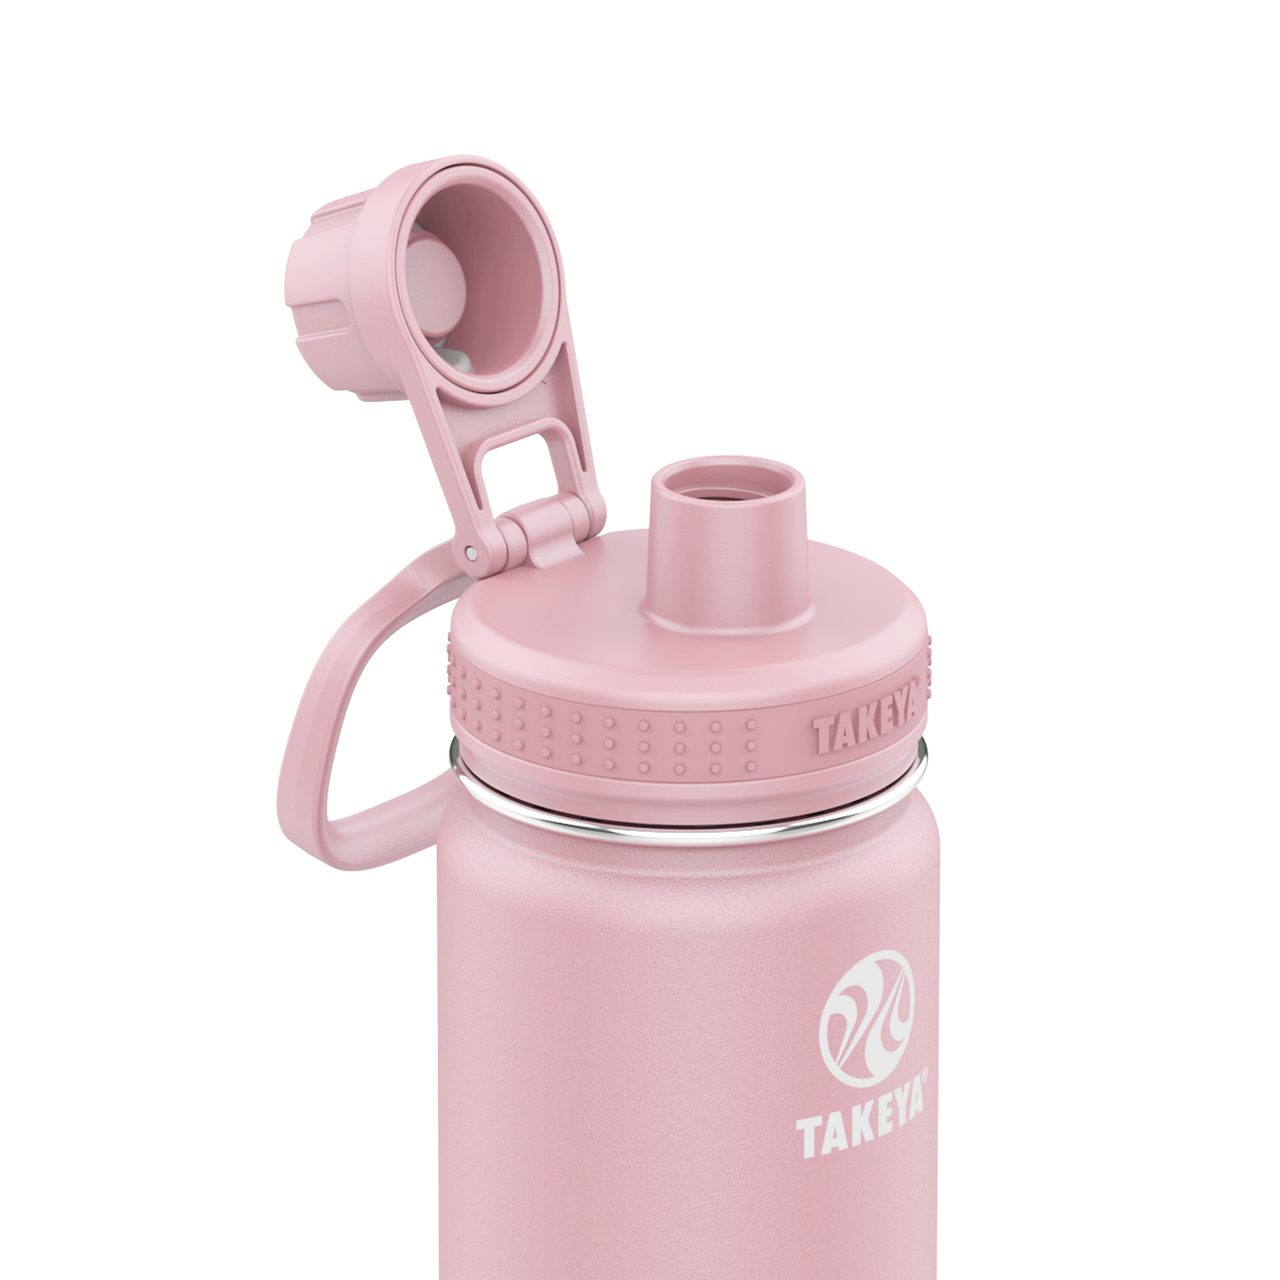 Takeya Actives Stainless Steel Water Bottle w/Straw lid, 24oz Lilac 